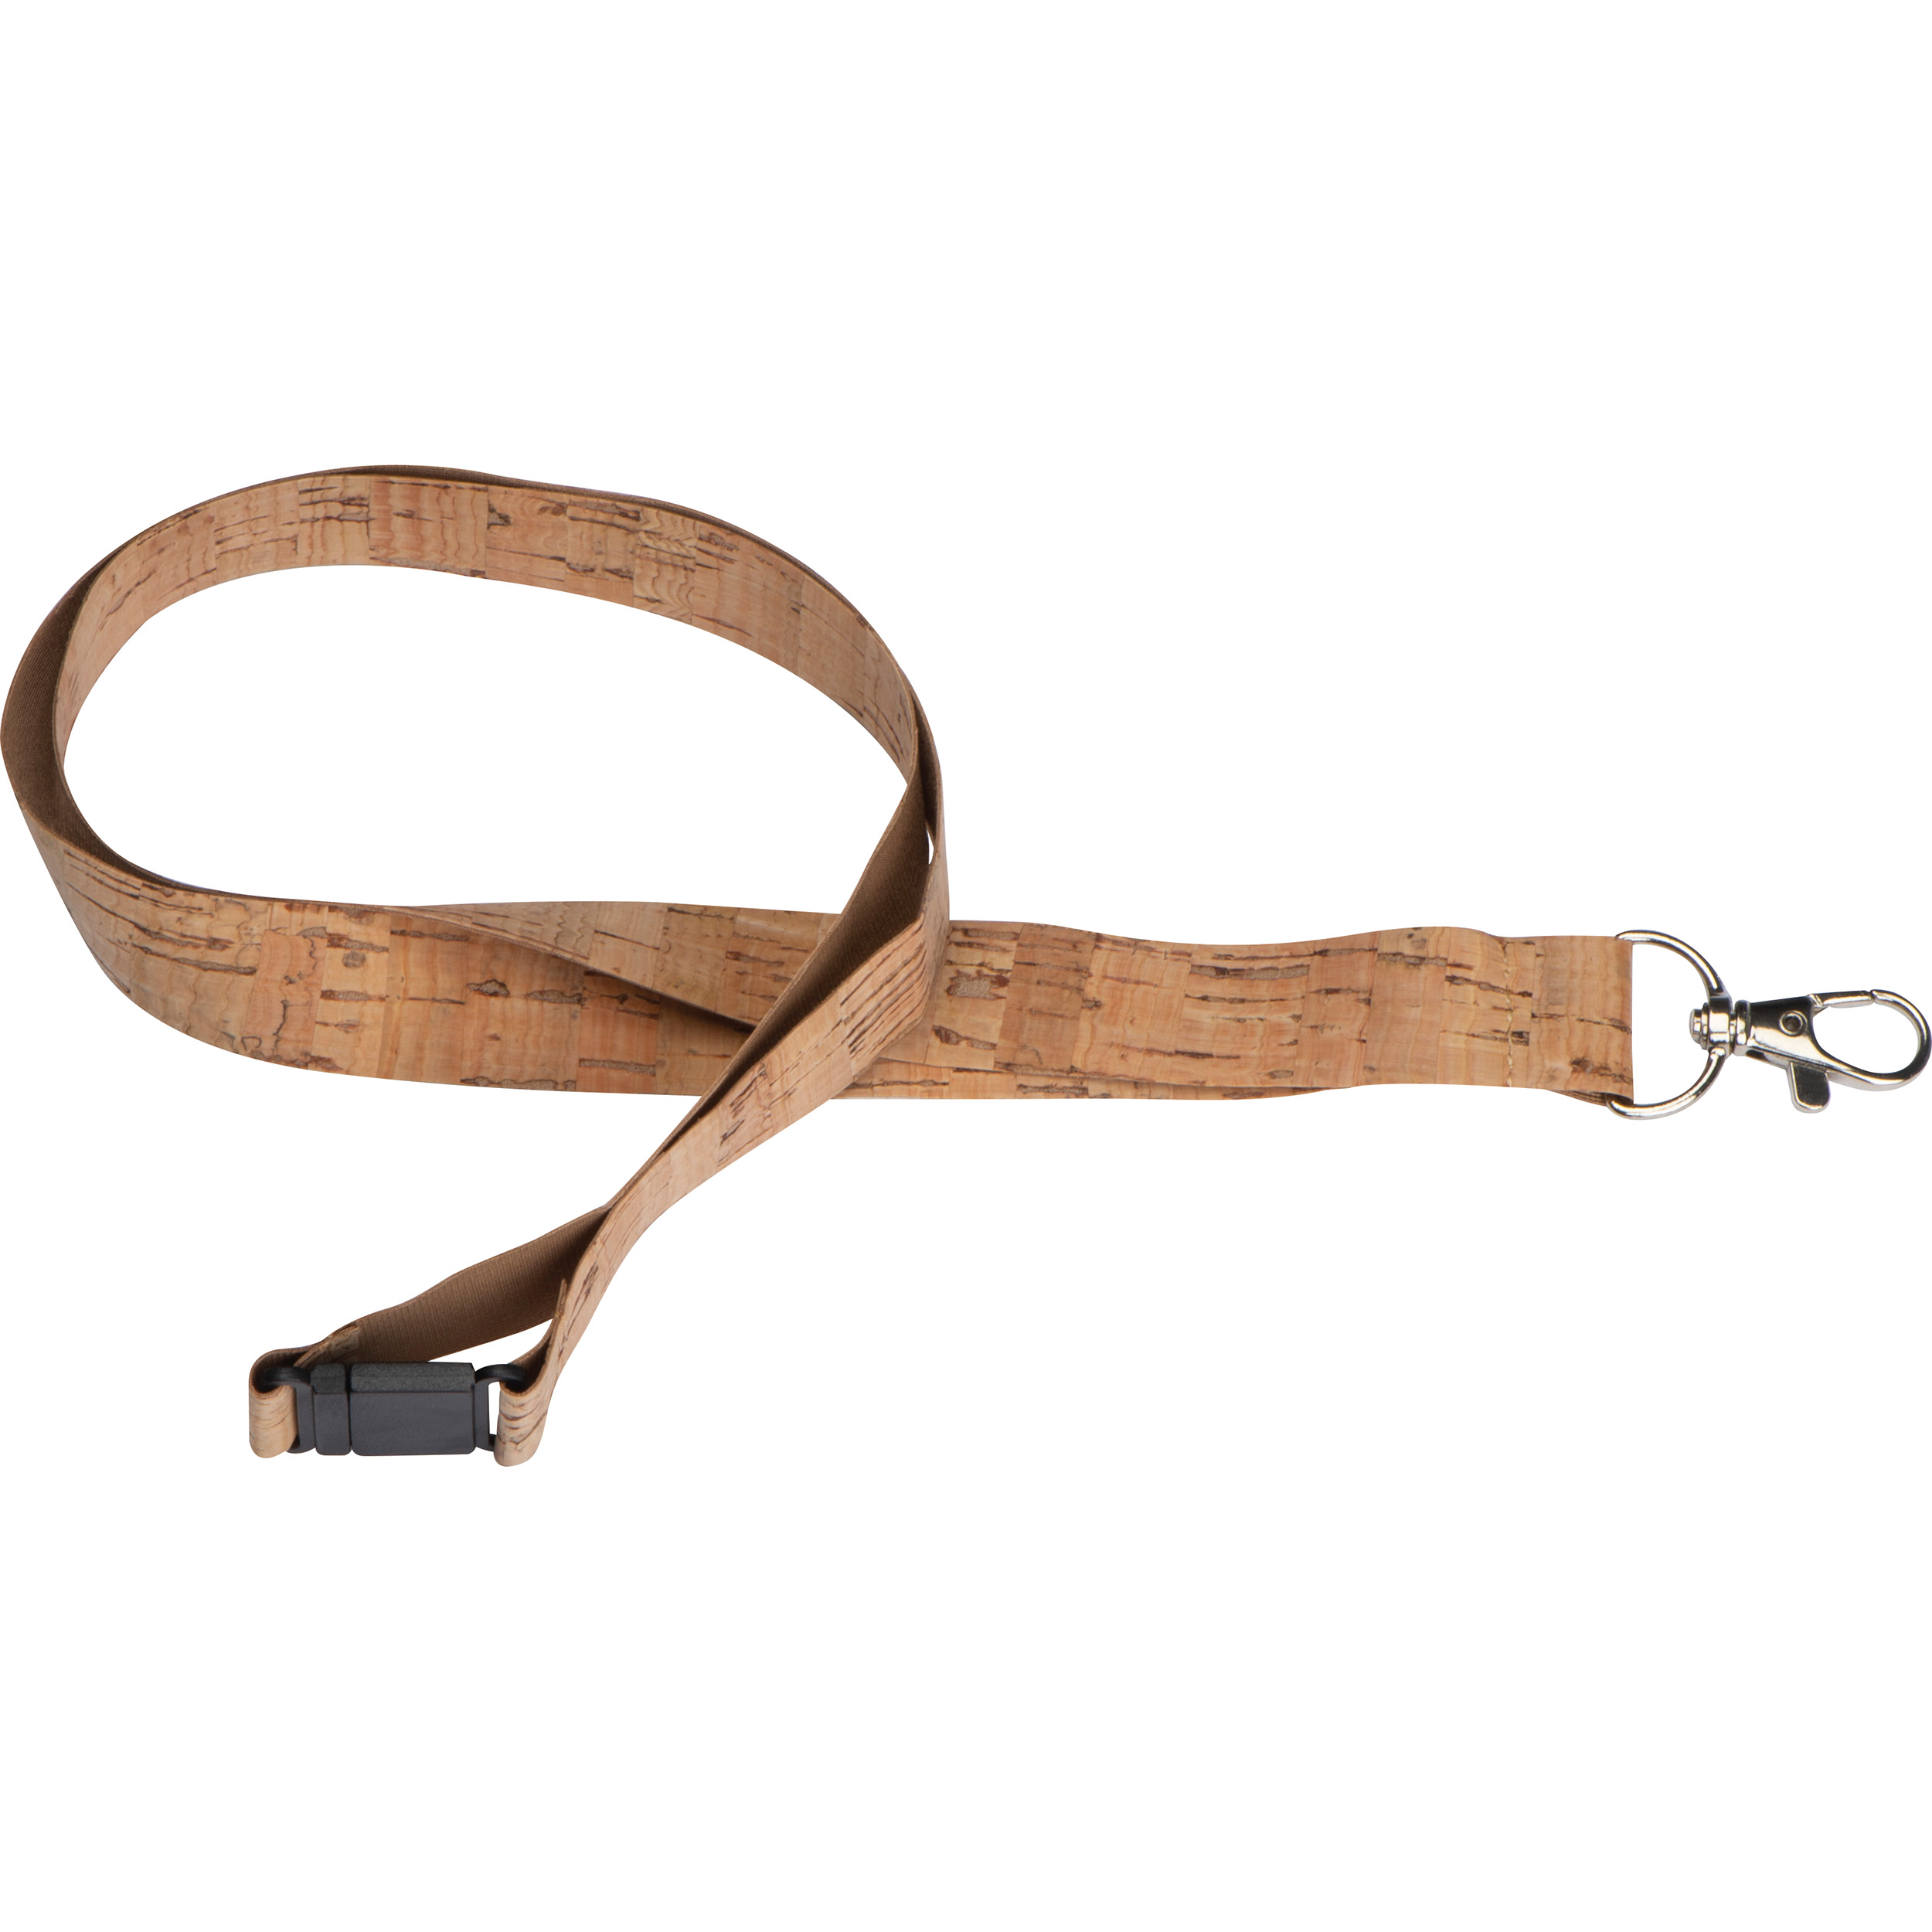 A lanyard made of printed cork material from Newton Blossomville, equipped with a carabiner and a safety clip for attachment and security purposes. - Bervie